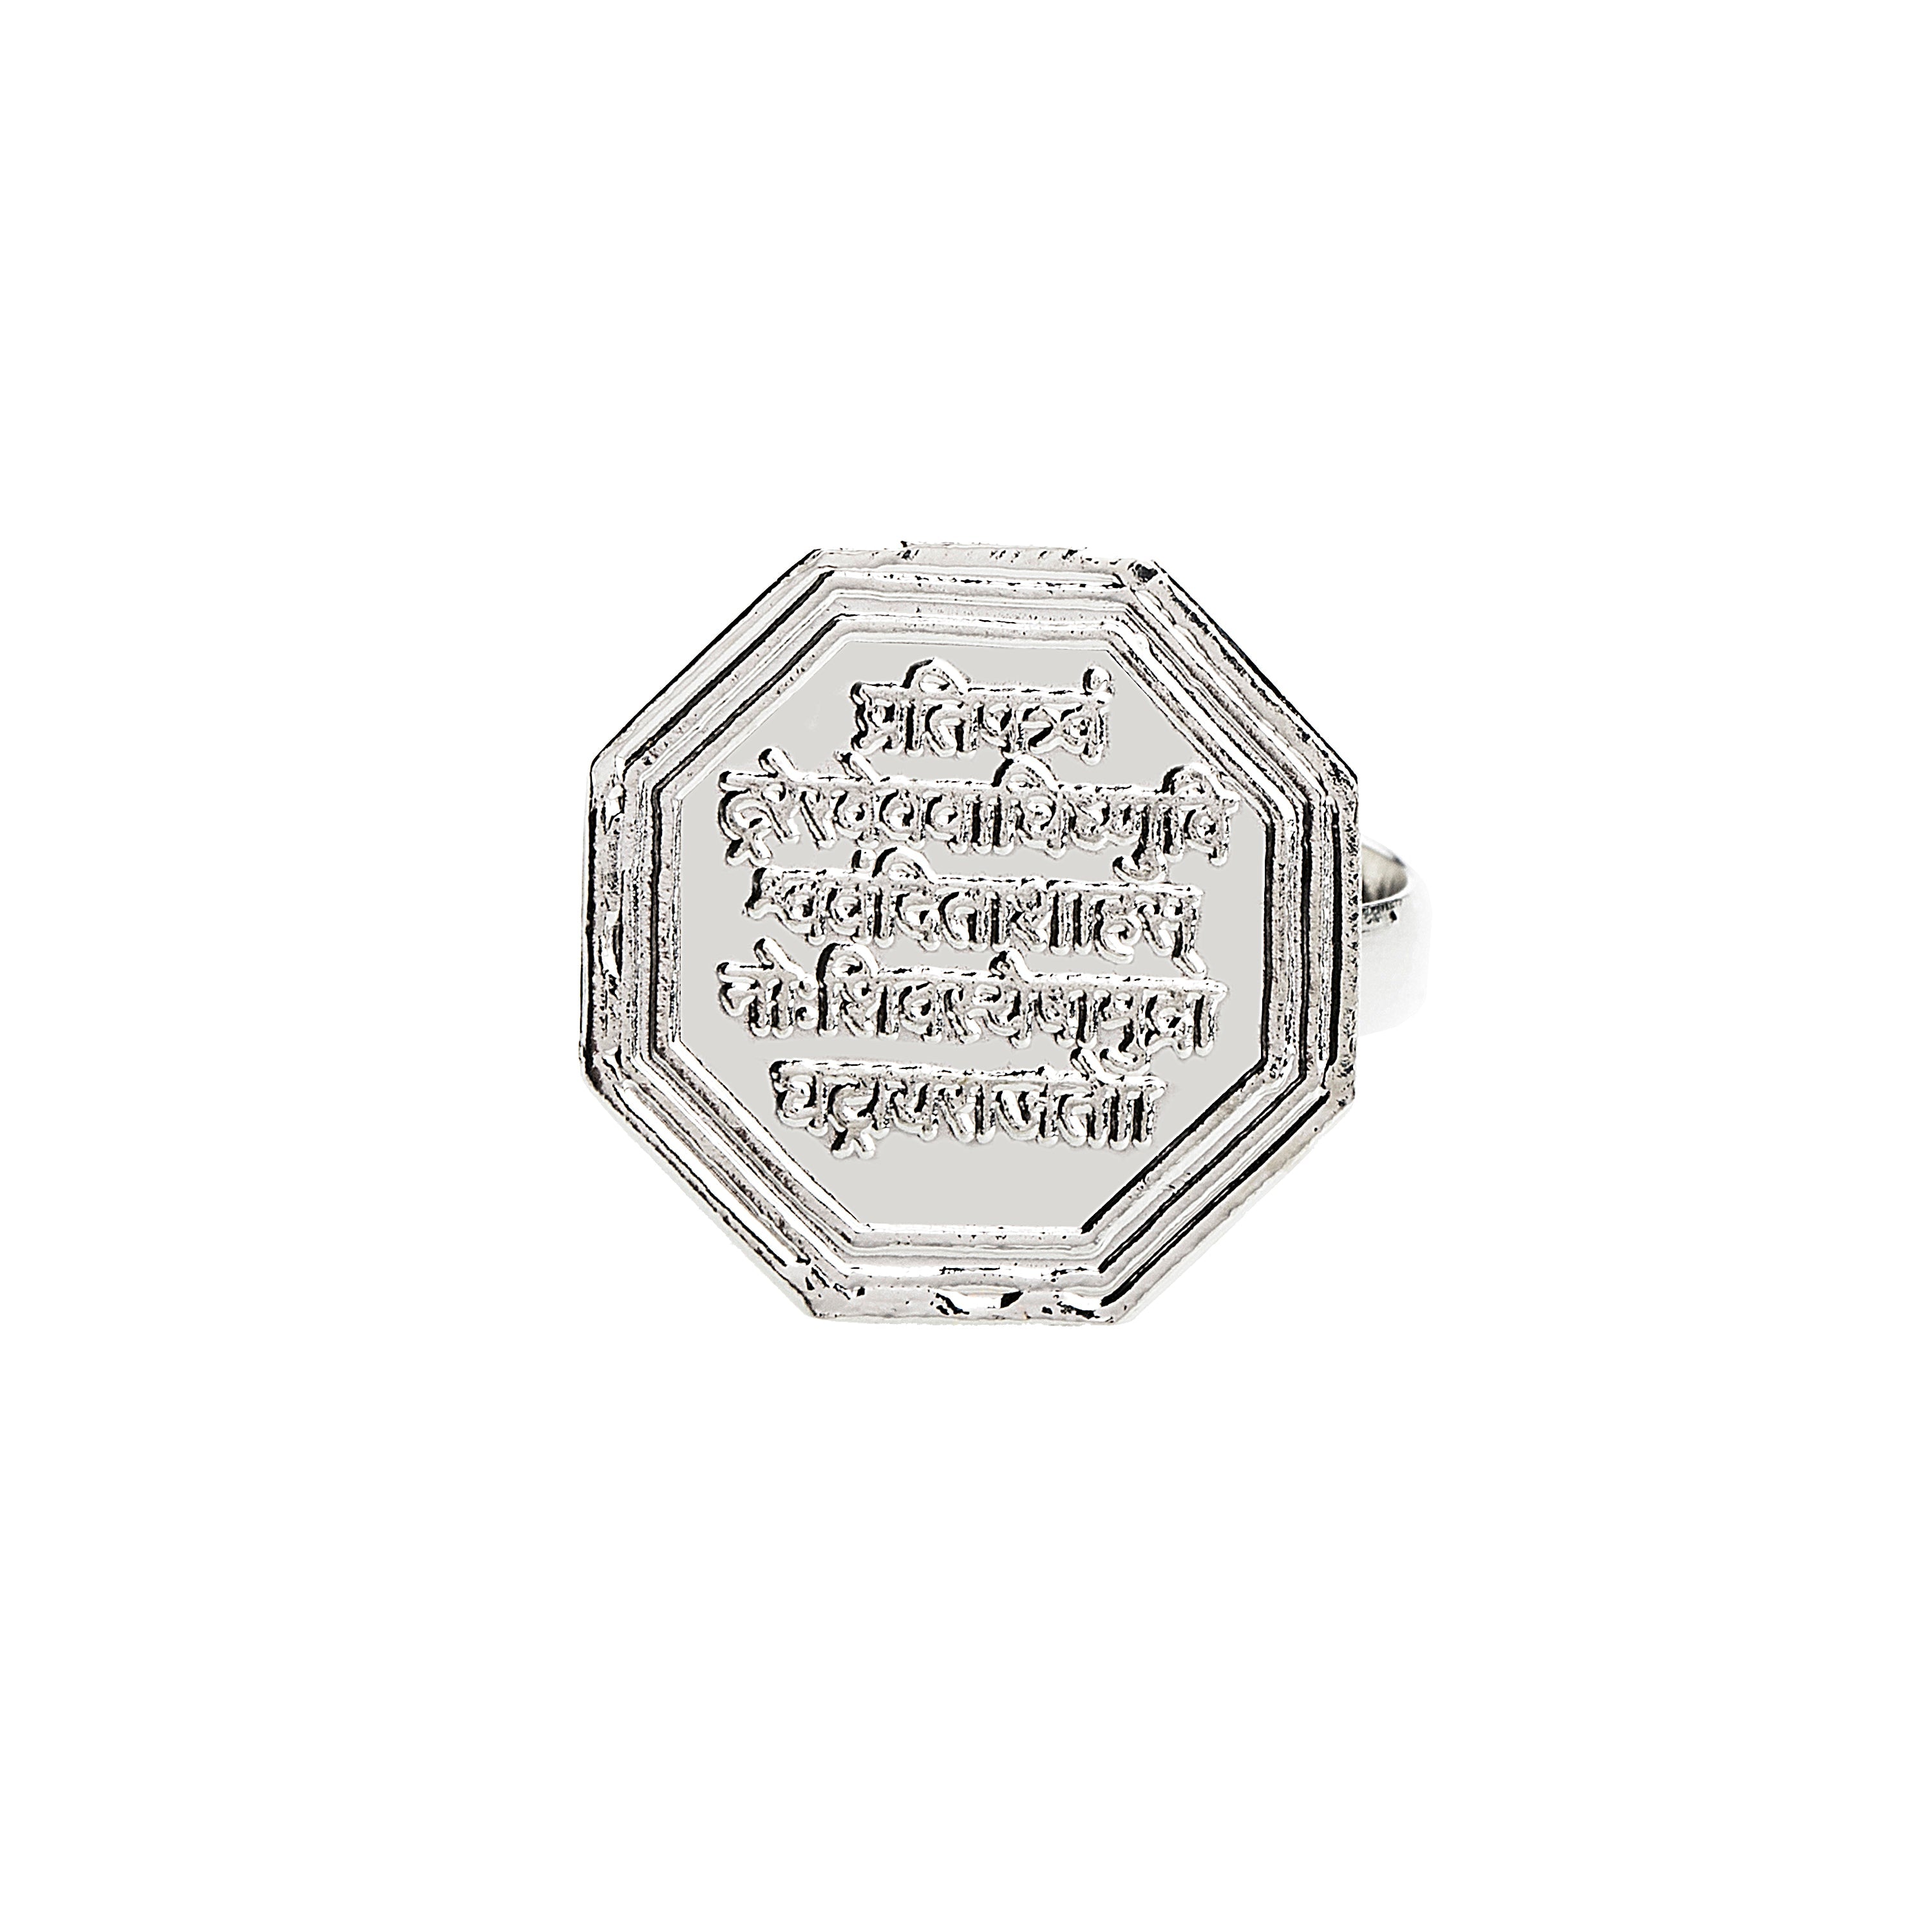 P N Gadgil & Sons - Words of assurance, in praise of the glorious  Chatrapati Sambhaji Maharaj. The weight of this finger ring is approx  7.39gms and will cost approx RS.40,372/- based